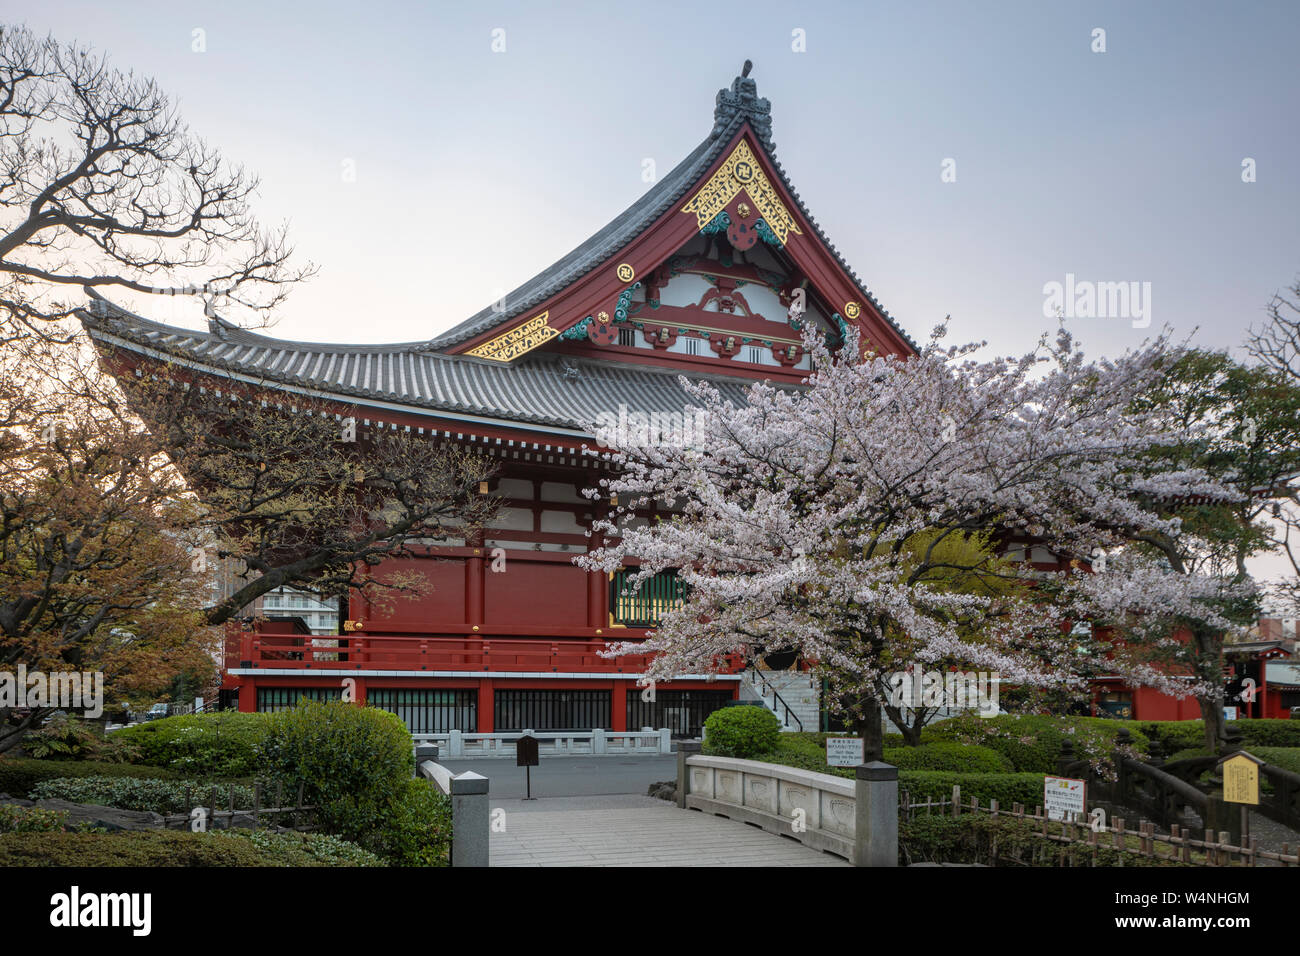 Senso-ji temple in the city of Tokyo, Japan. An ancient Buddhist temple in the Asakusa district of Tokyo. Stock Photo